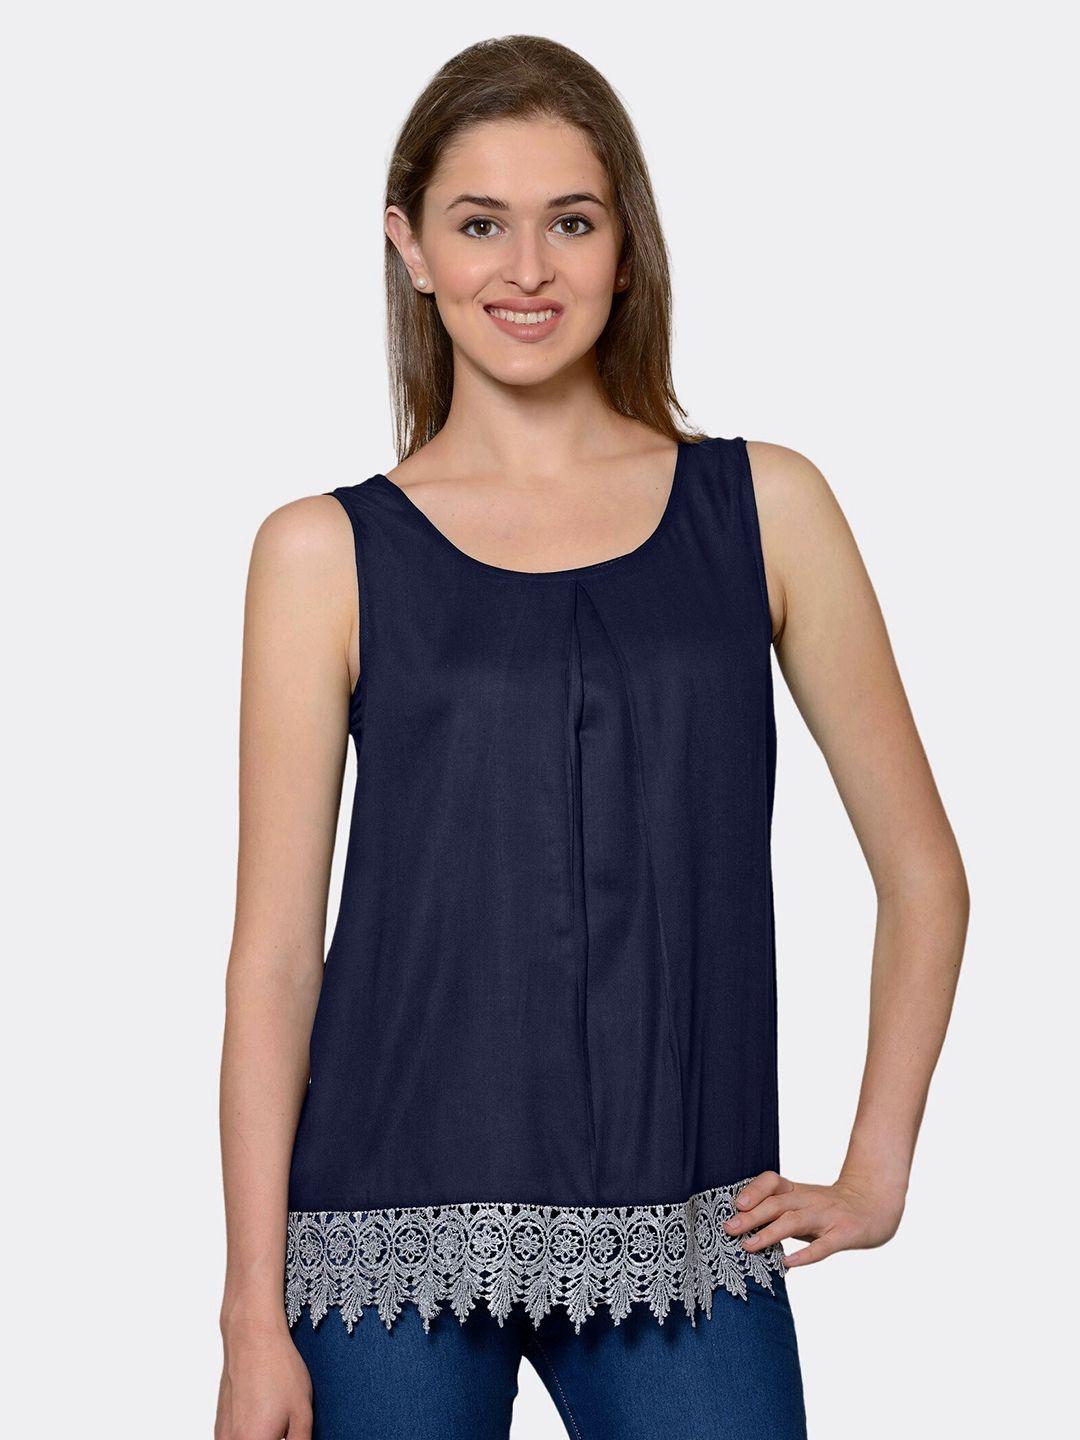 patrorna-women-navy-blue-solid-lace-detail-top